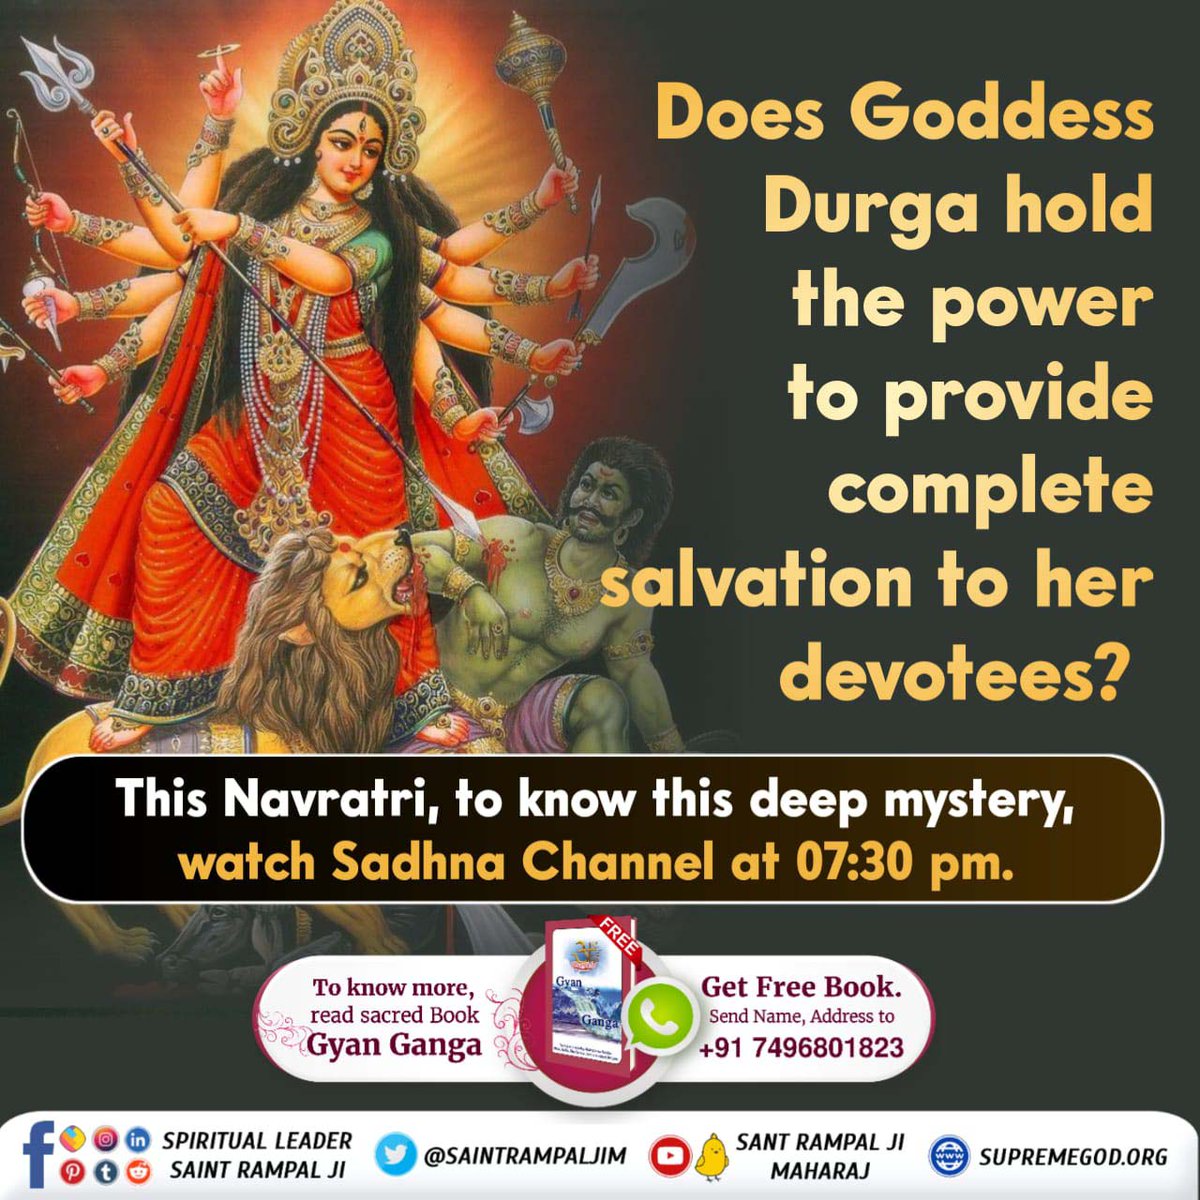 #माँ_को_खुश_करनेकेलिए पढ़ें ज्ञान गंगा People who are unaware about the ultimate Spiritual Knowledge worship Goddess Durga. But our Holy Scriptures like Vedas and Shrimad Bhagwat Gita suggest worshiping Almighty God Kabir Saheb. #GodMorningWednesday